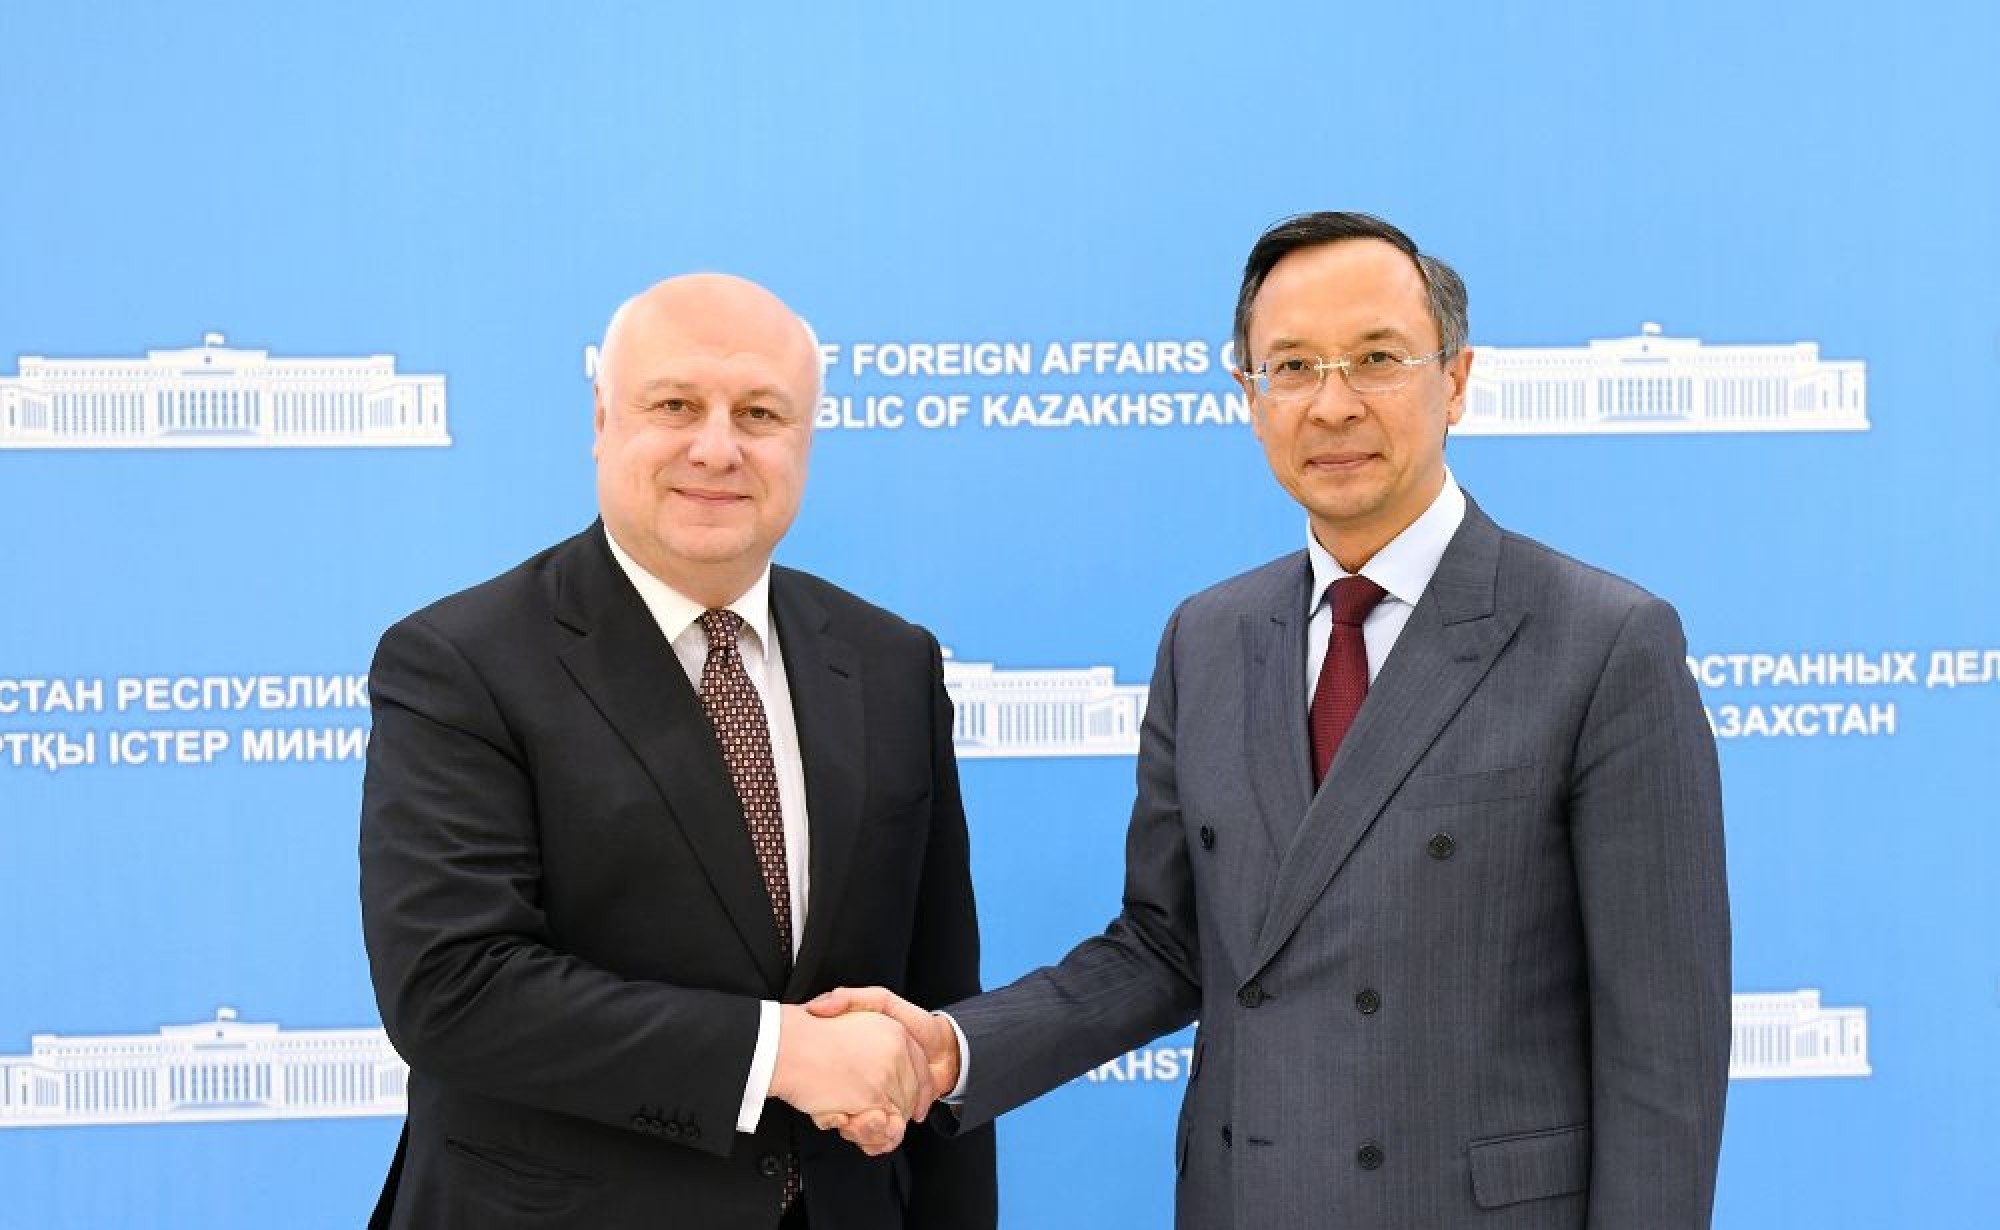 Kairat Abdrakhmanov met with the head of the OSCE Parliamentary Assembly